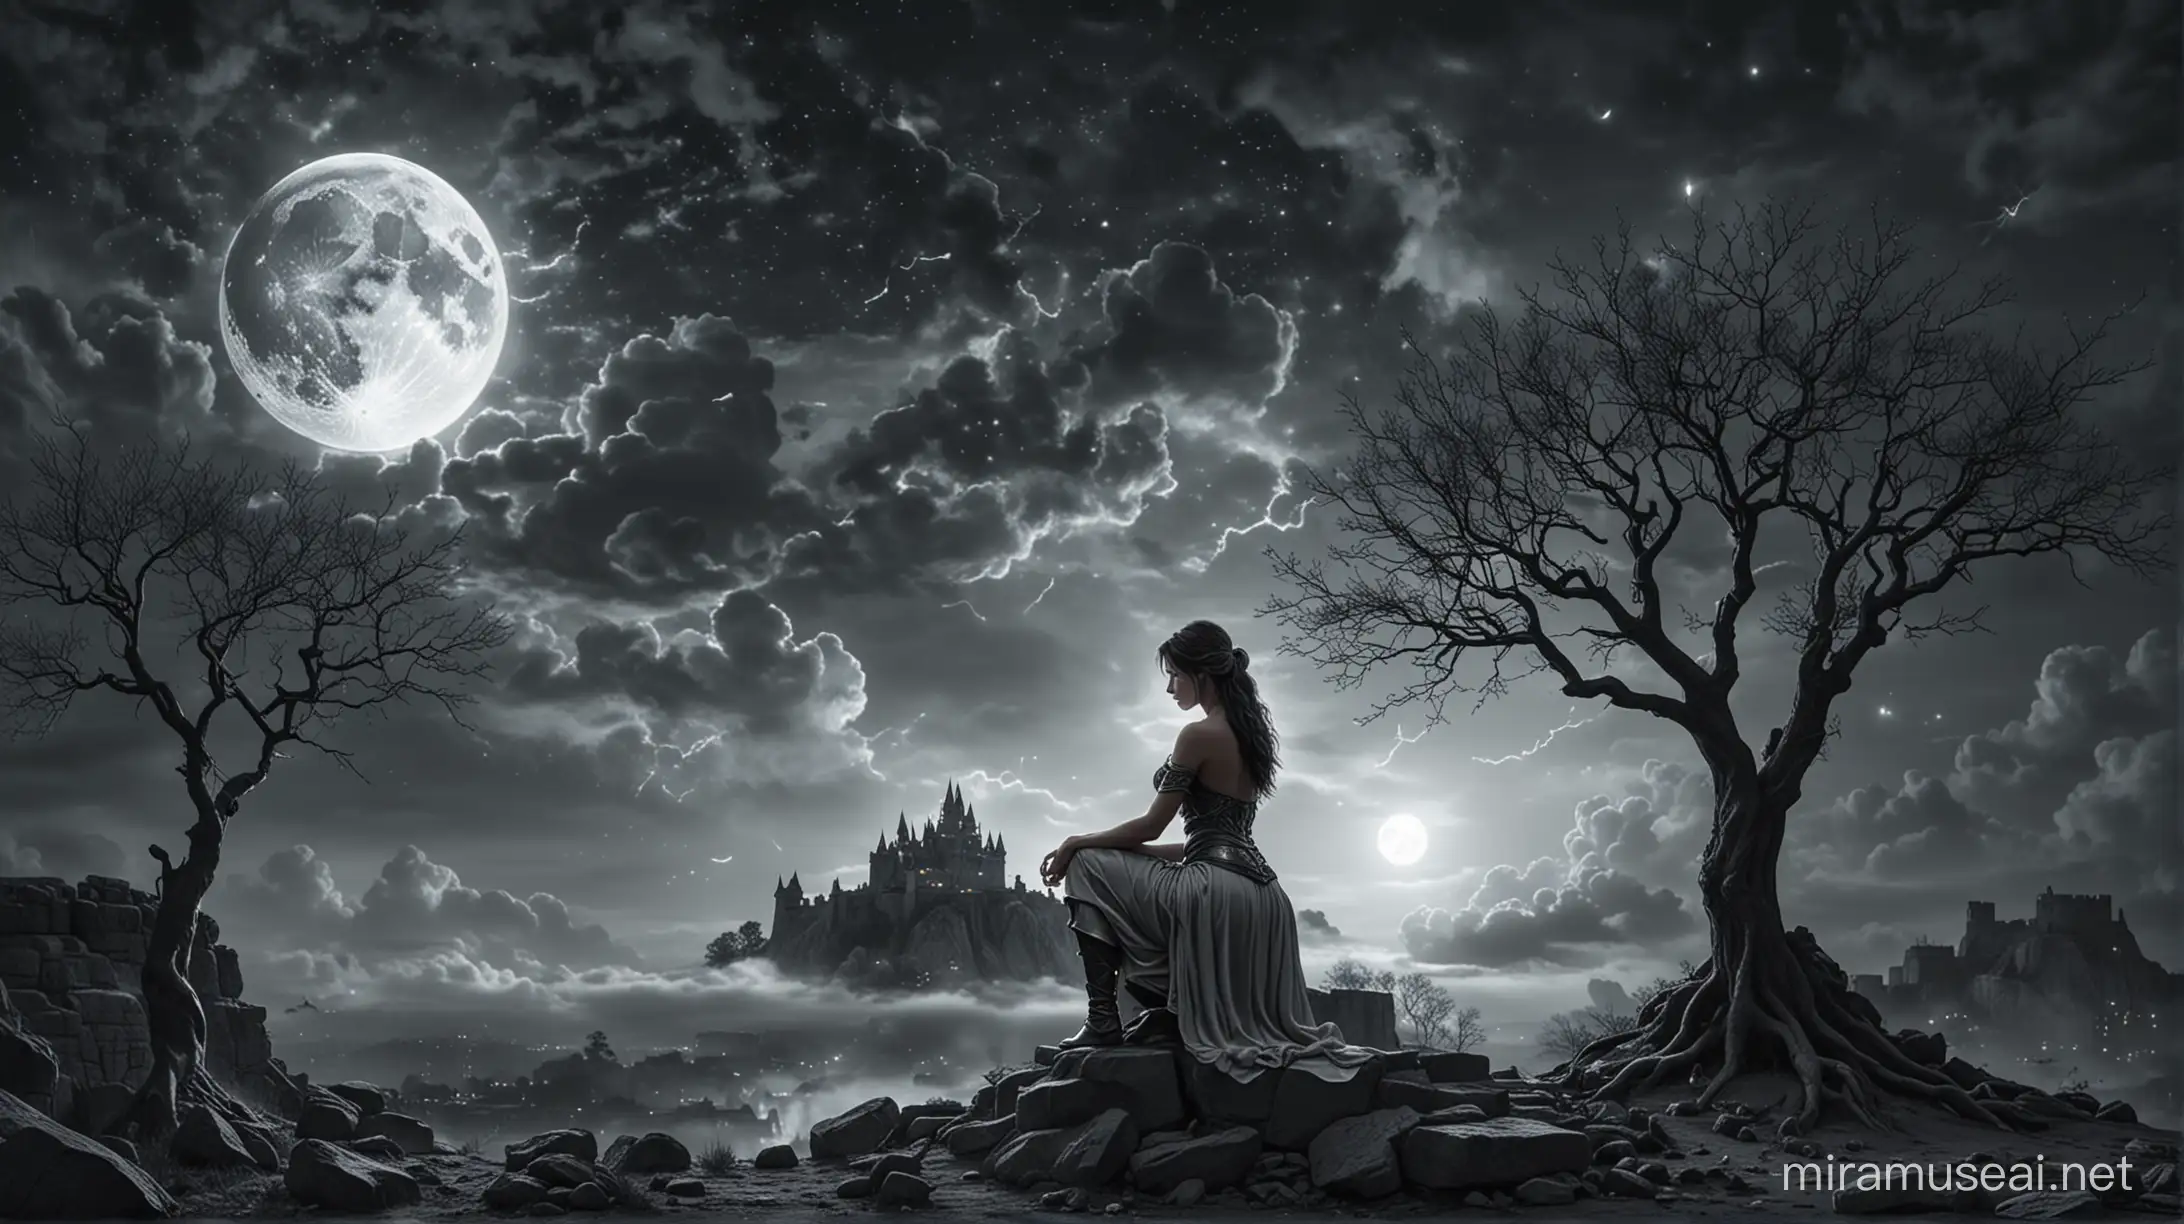 Stoic Muscular Figure Amidst Moonlit Night with Falling Stars and Lightning Striking Fortress